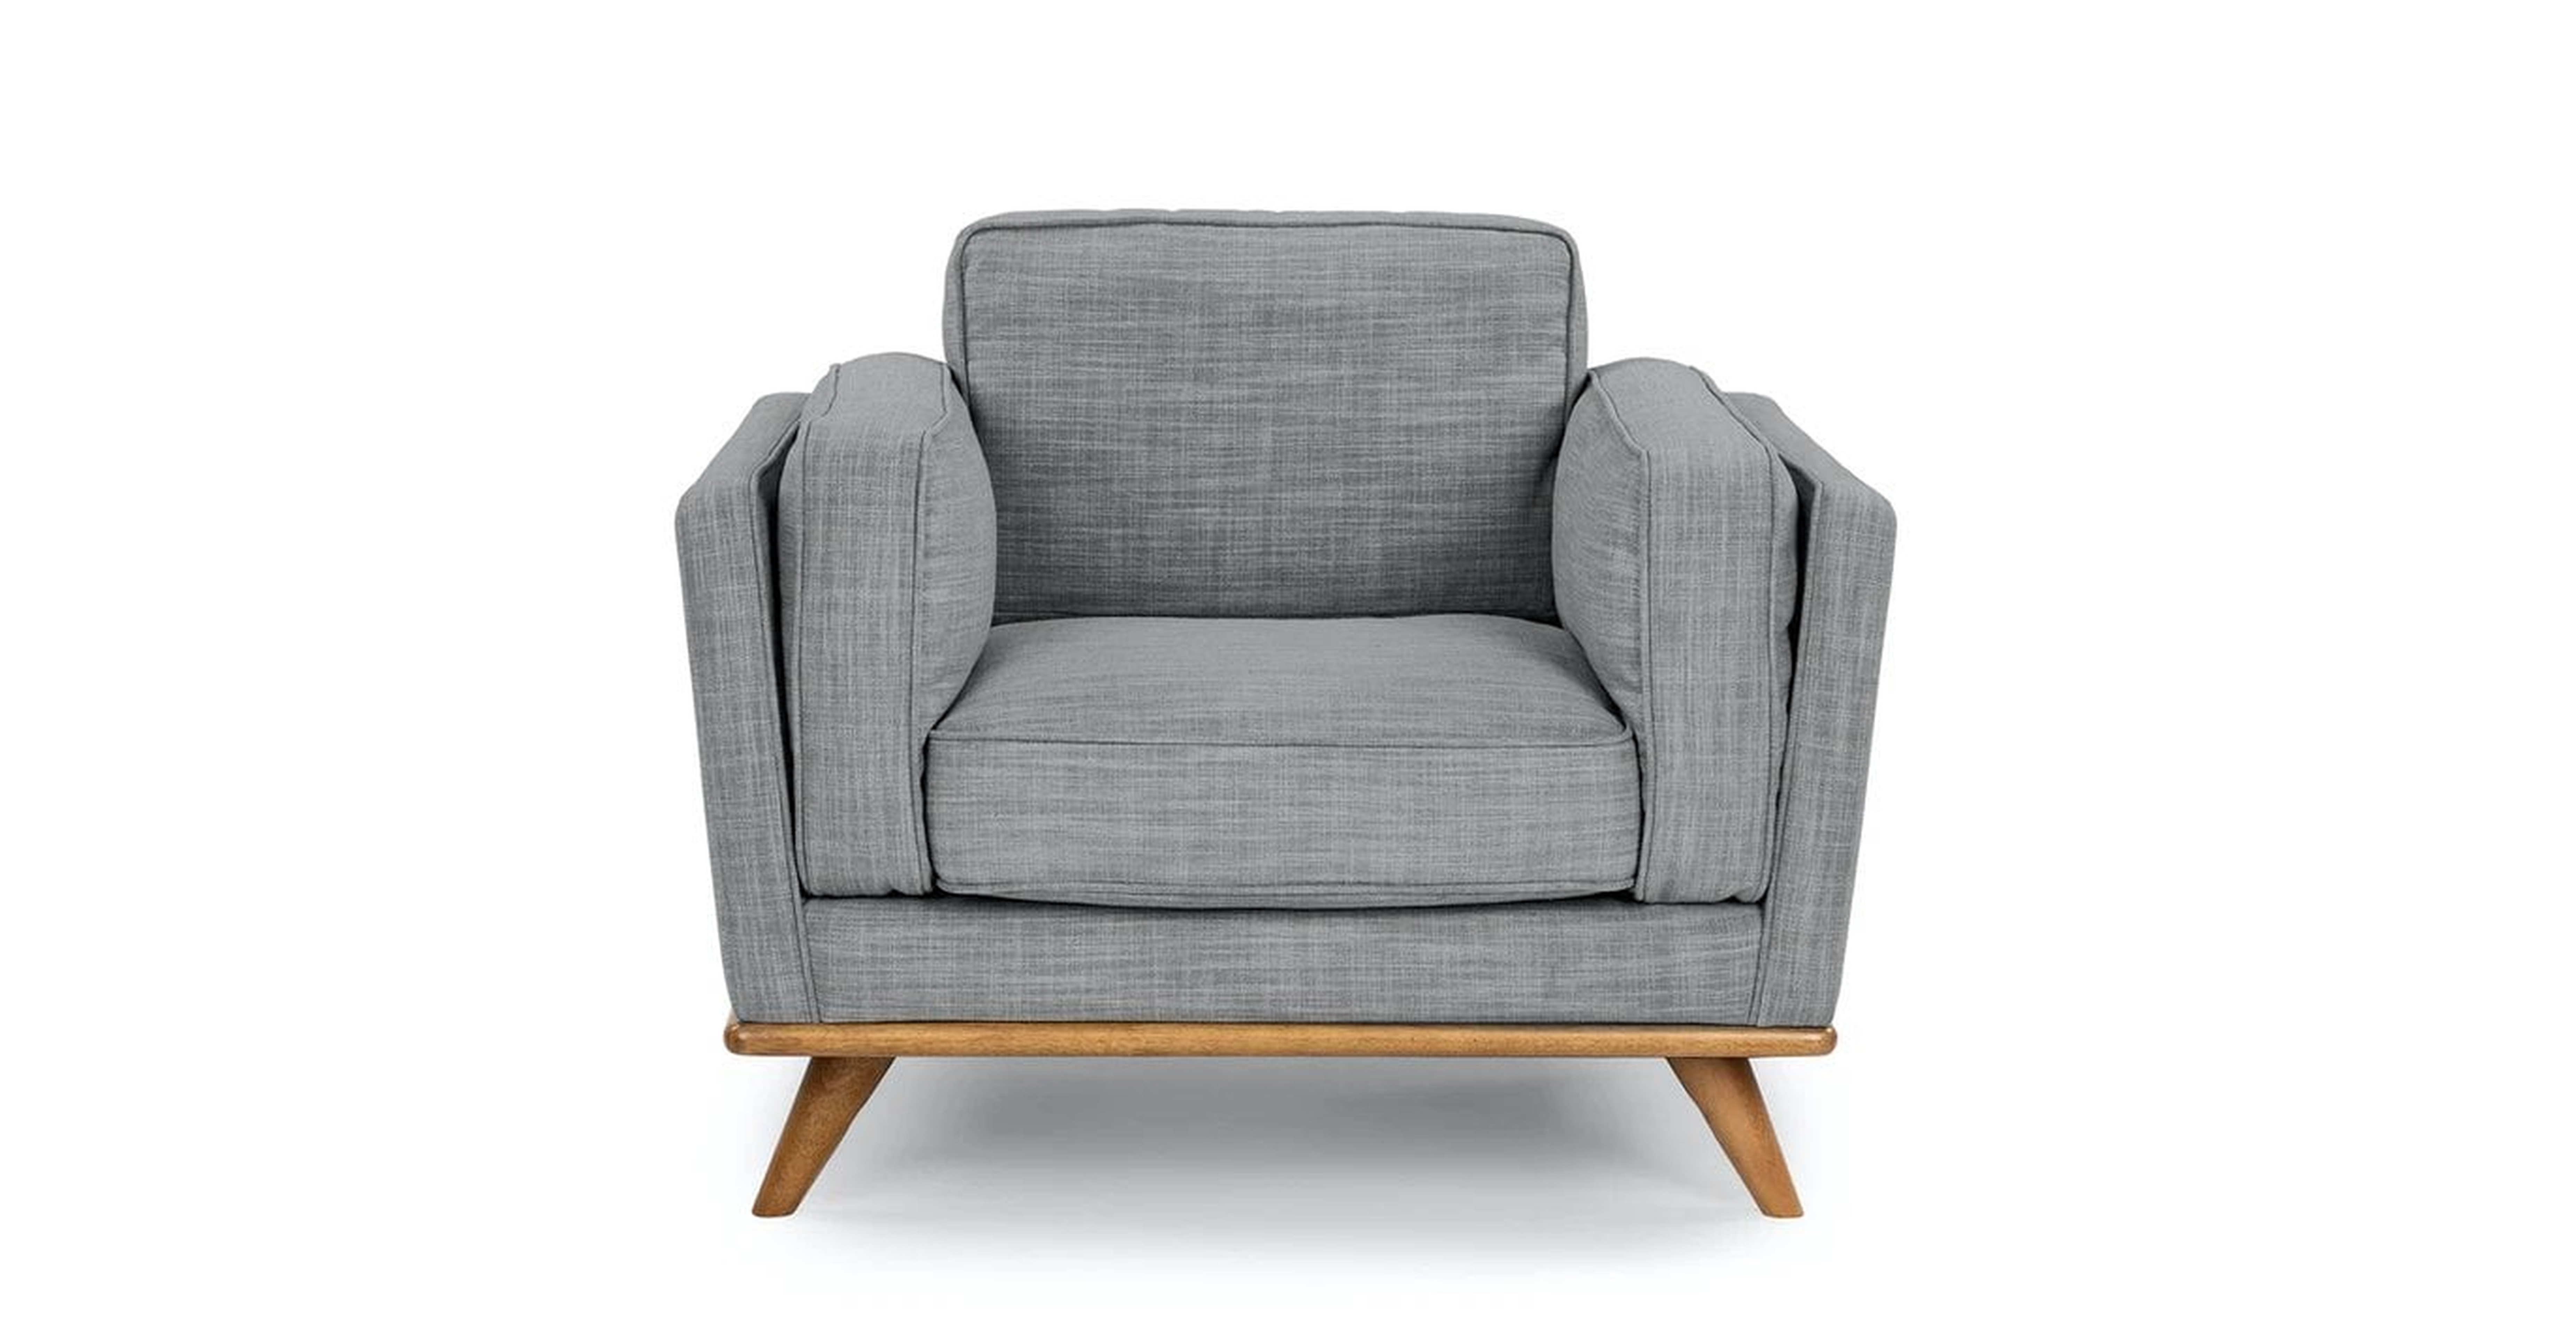 Timber Pebble Gray Chair - Article